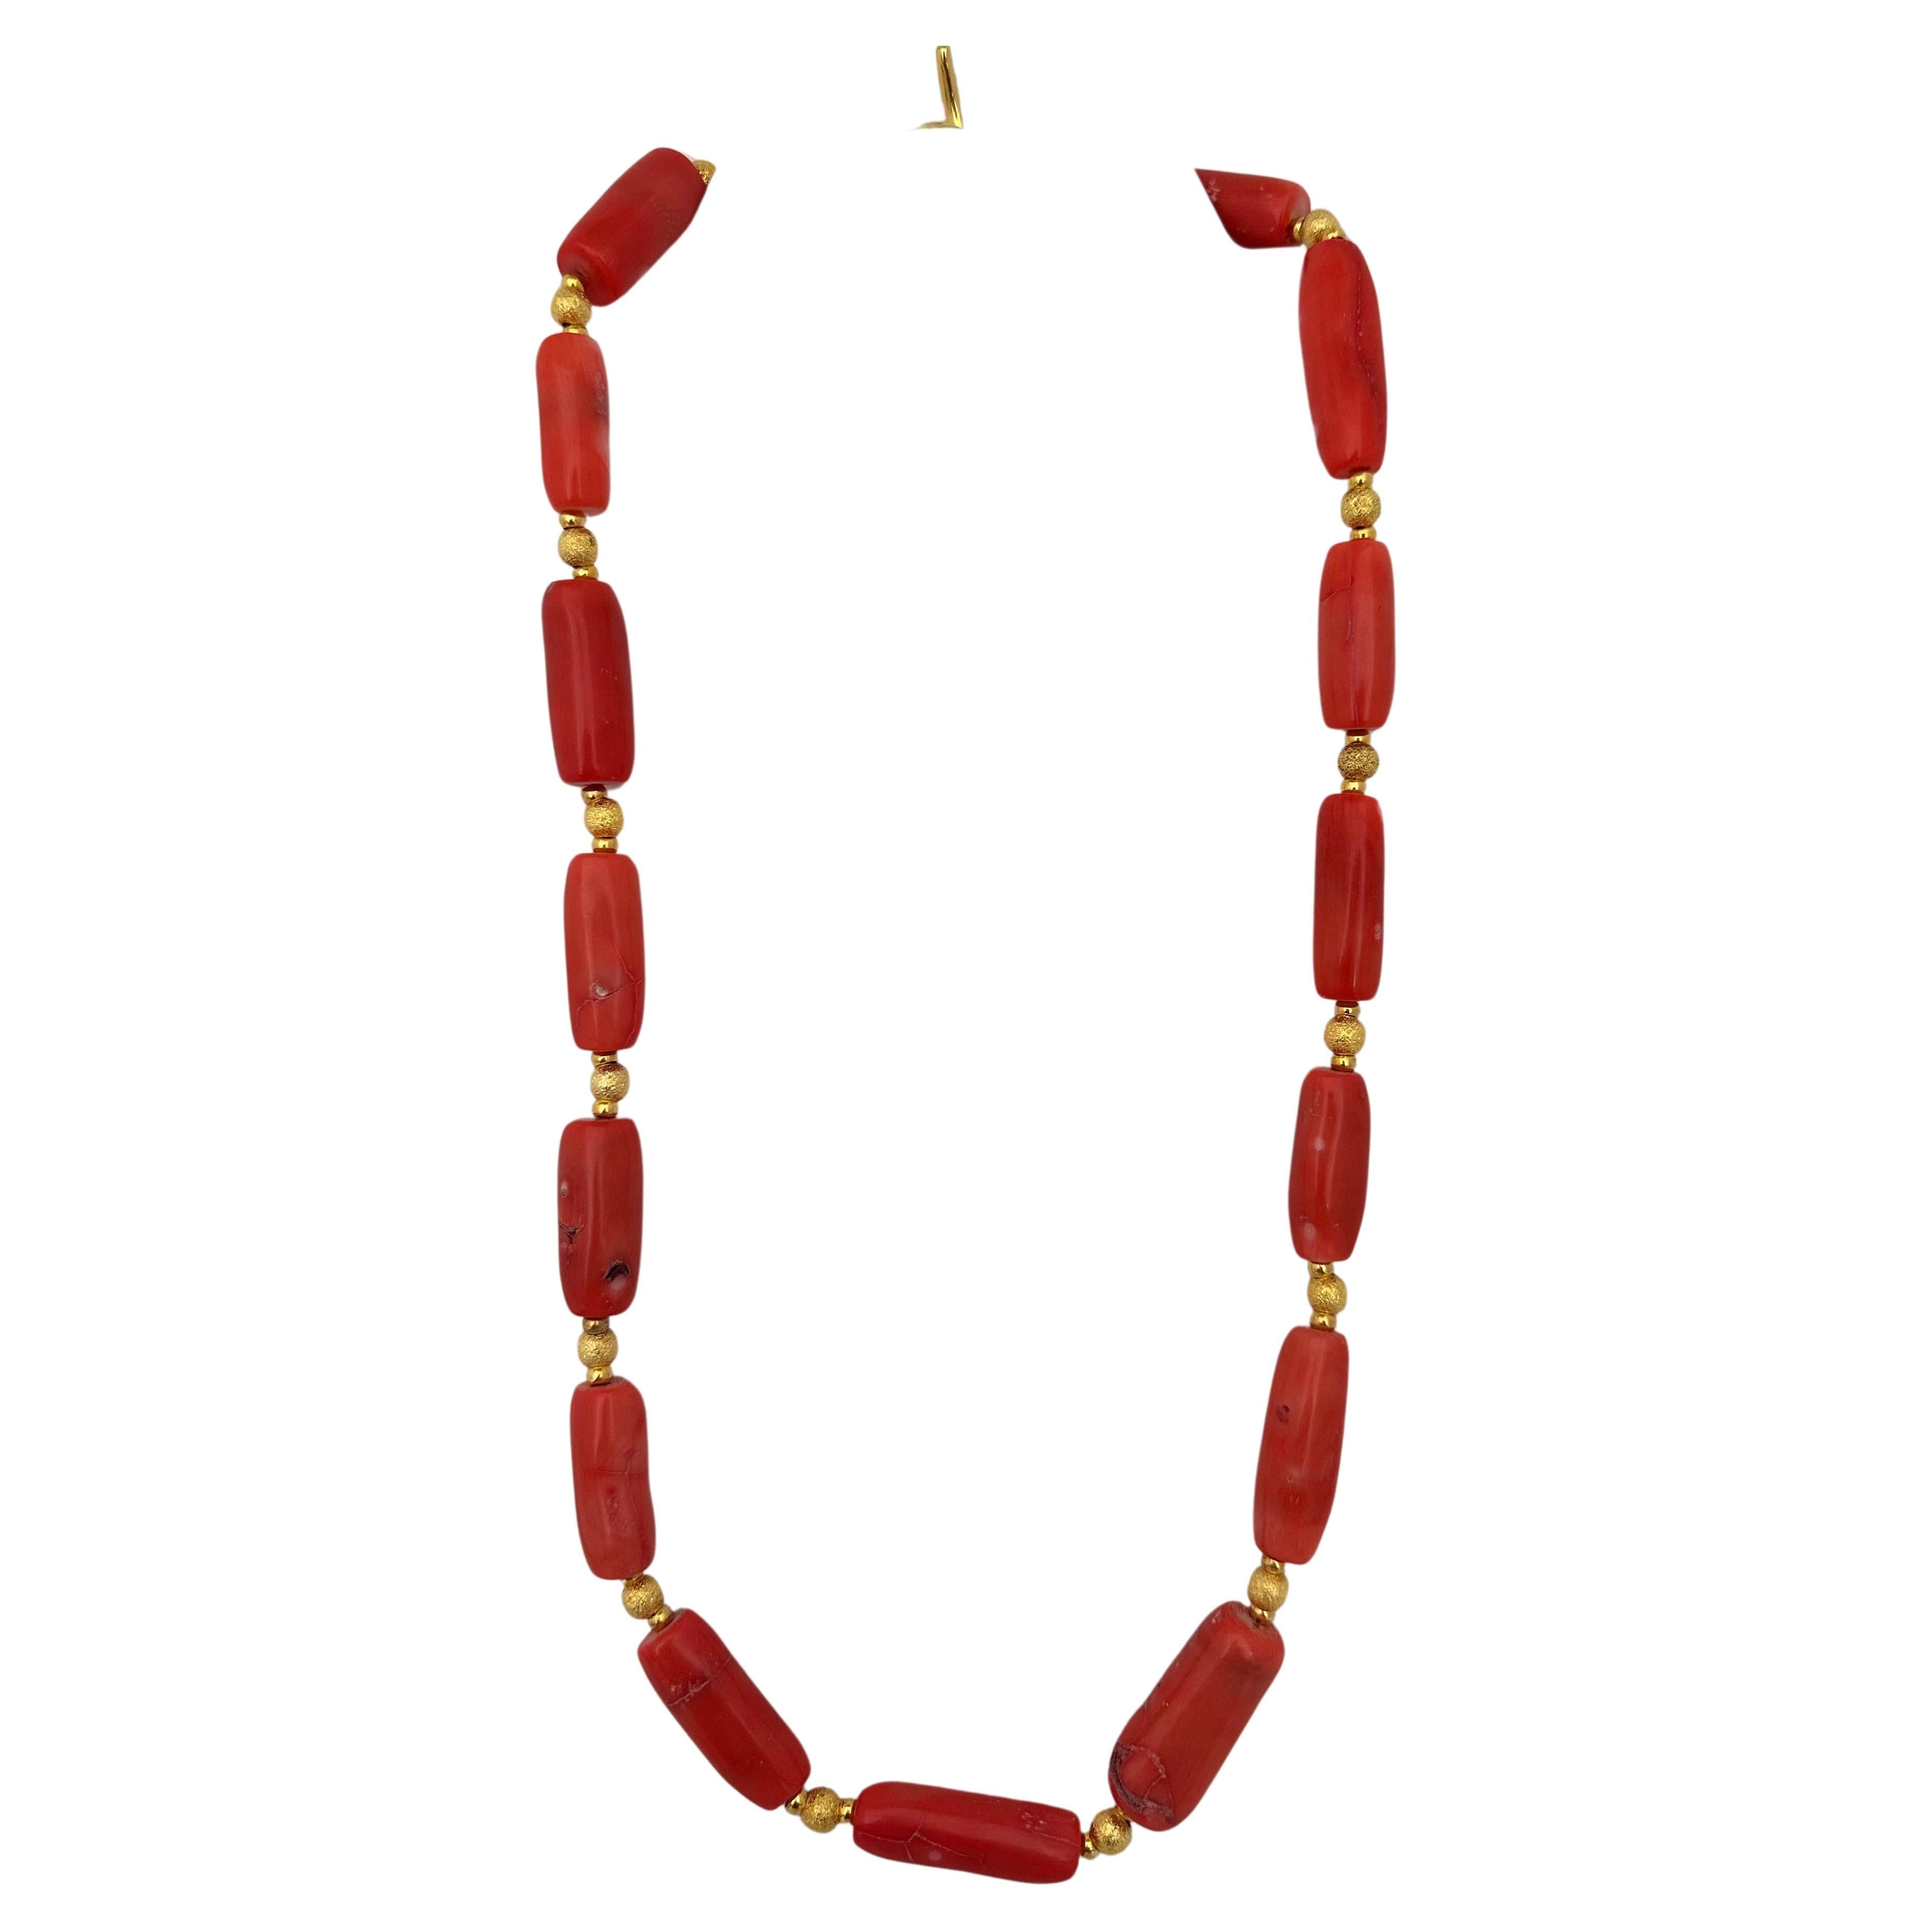 Handmade  Gold Beads & Salmon Barrel Shape Coral Beaded 26" Toggle Necklace #C46 For Sale